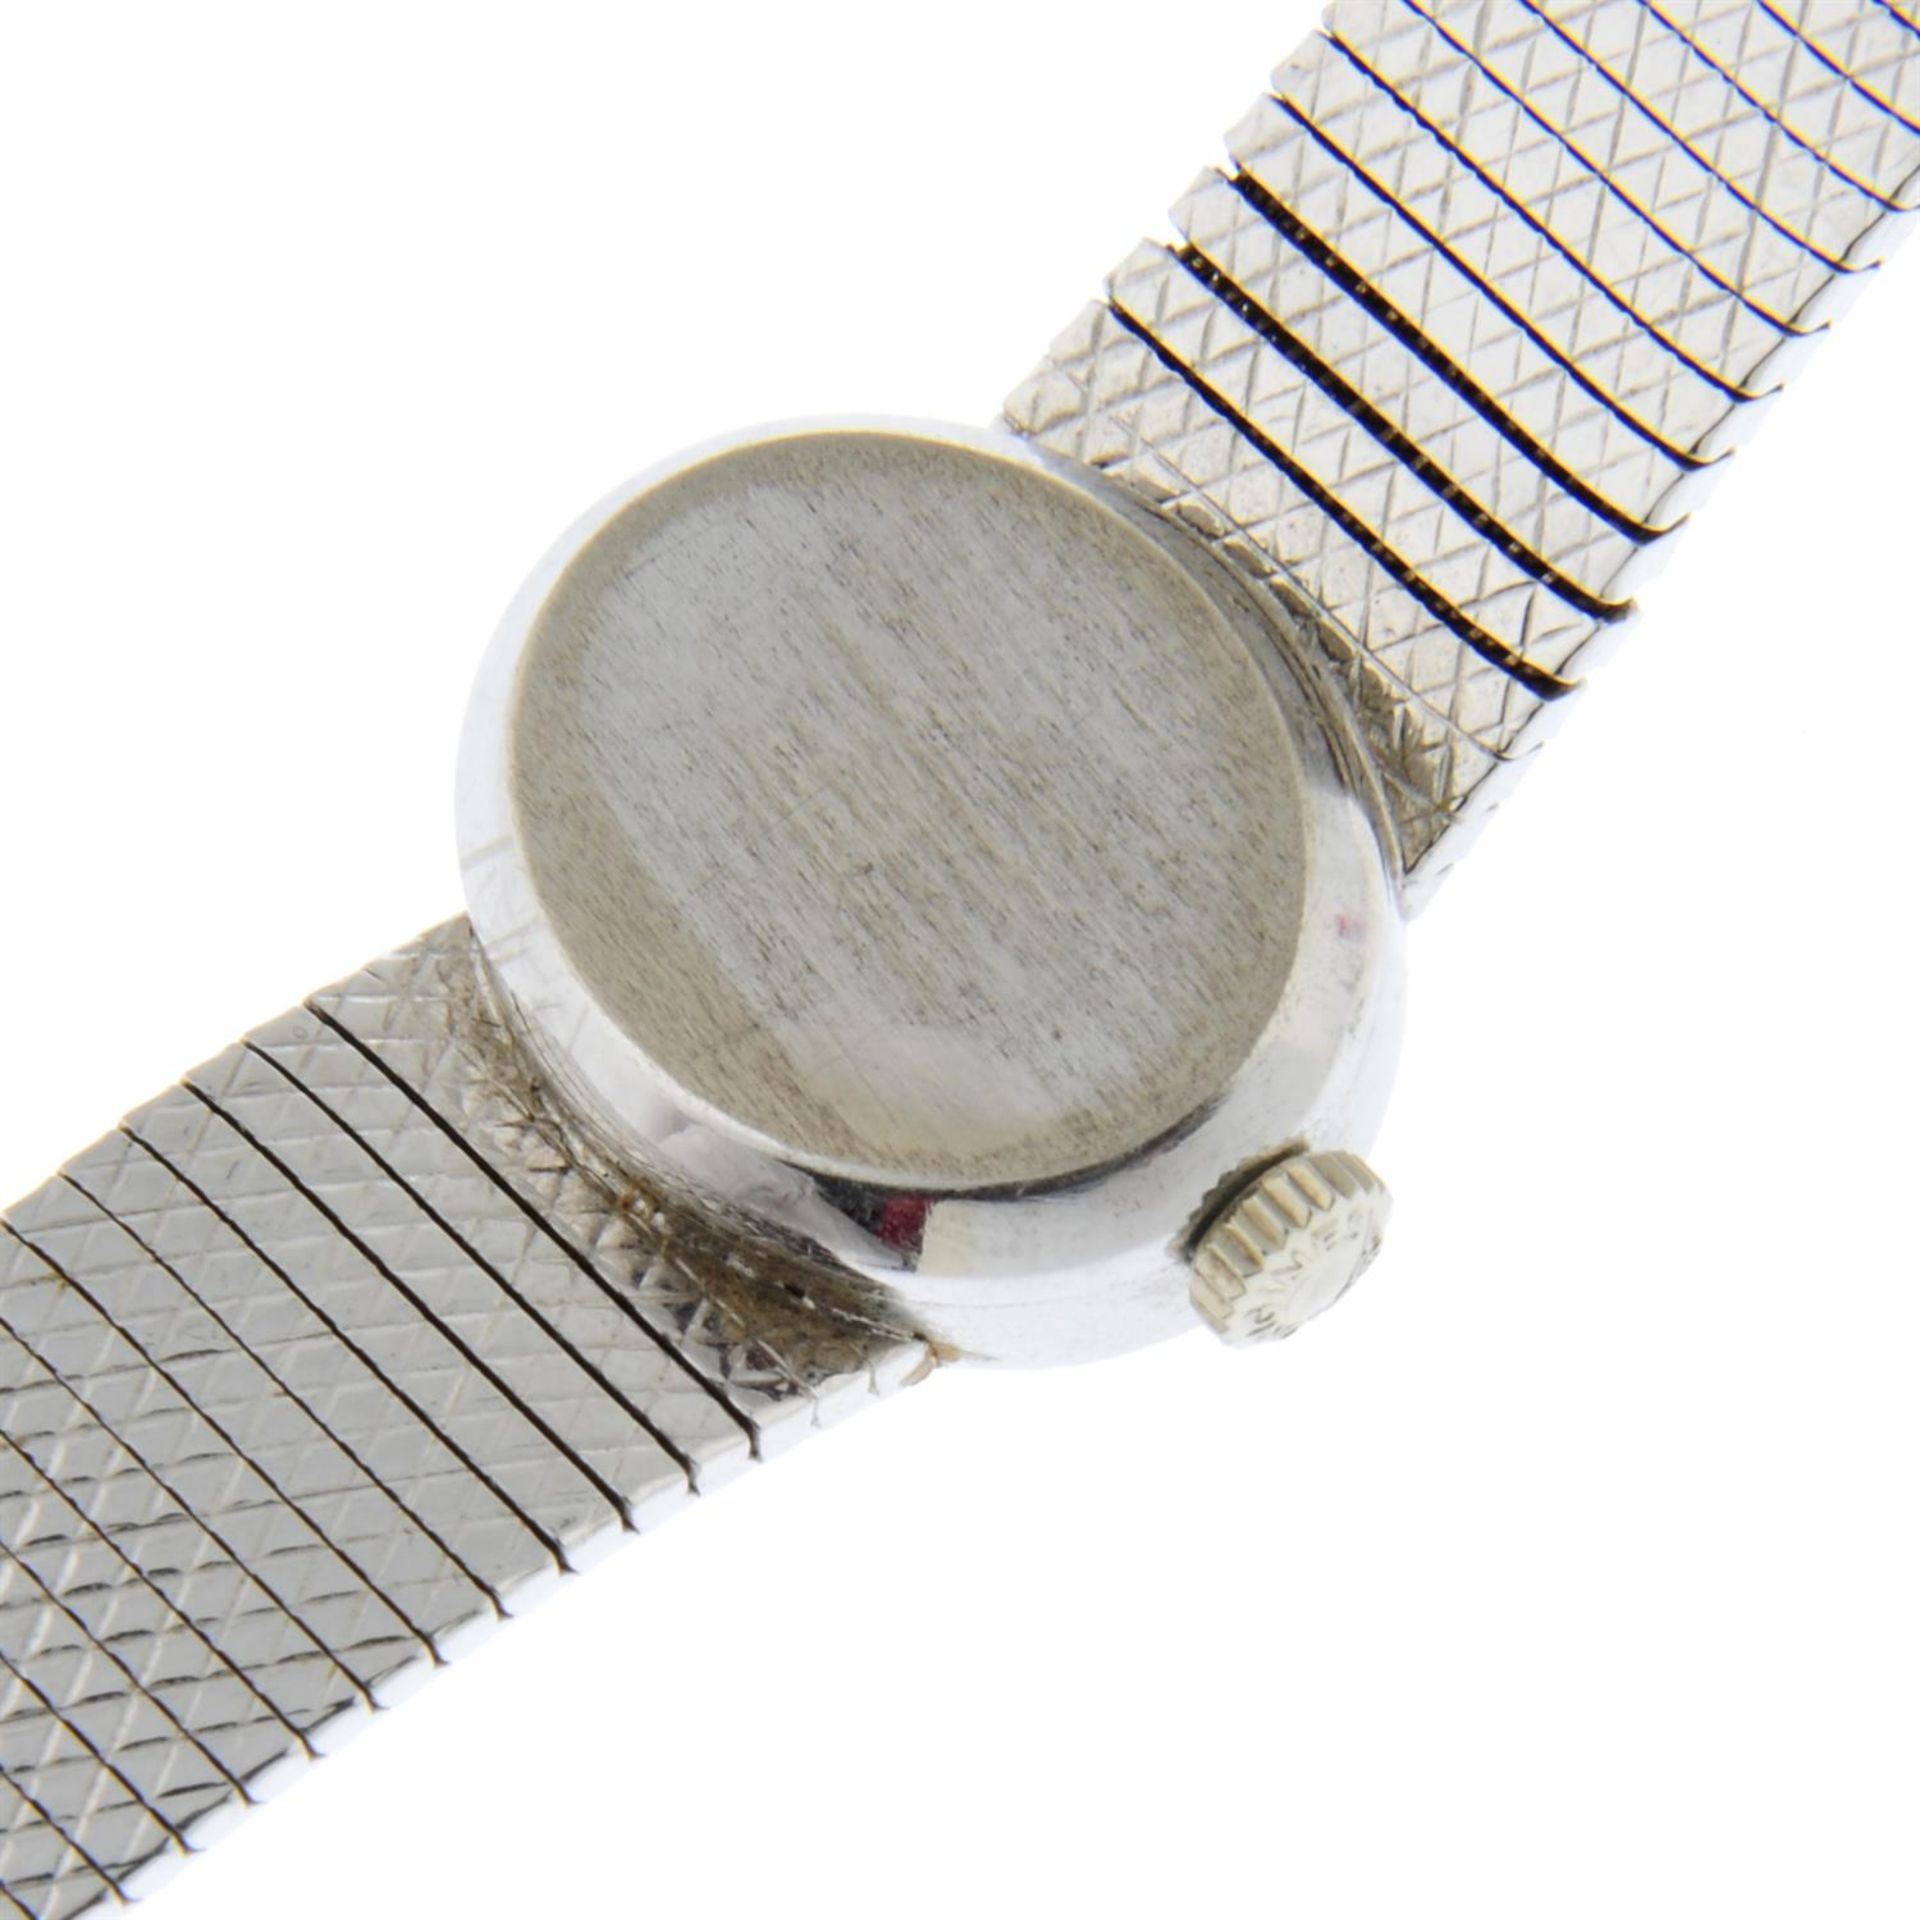 LONGINES - a 9ct white gold bracelet watch, 18mm. - Image 4 of 4